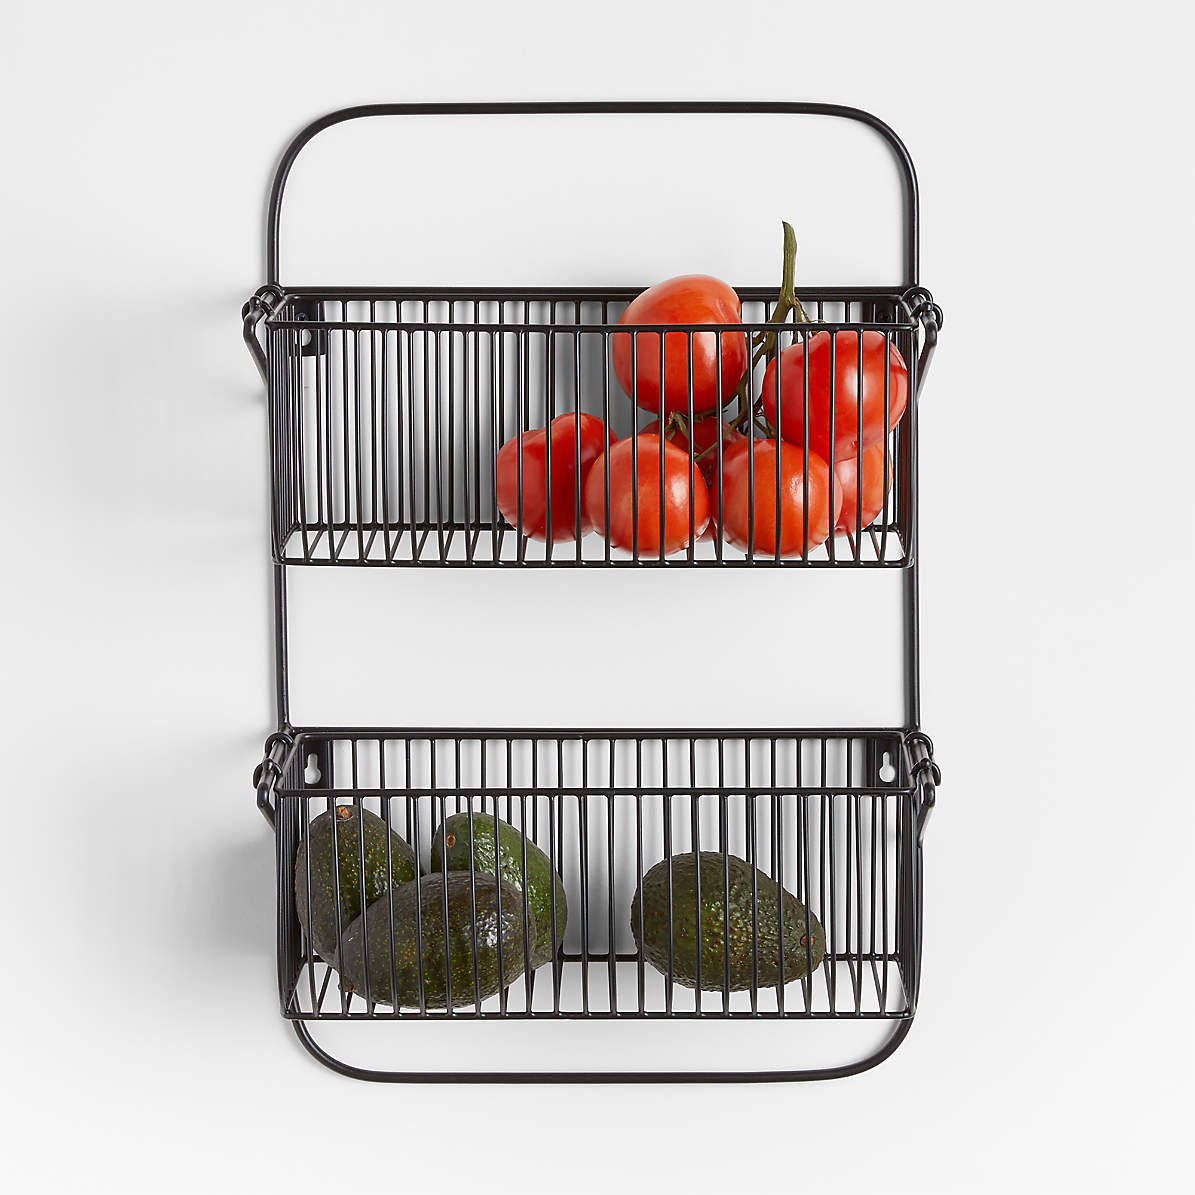 Home Decor 2 Tiers Stainless Steel Fruit Basket Rack Tray Fashion